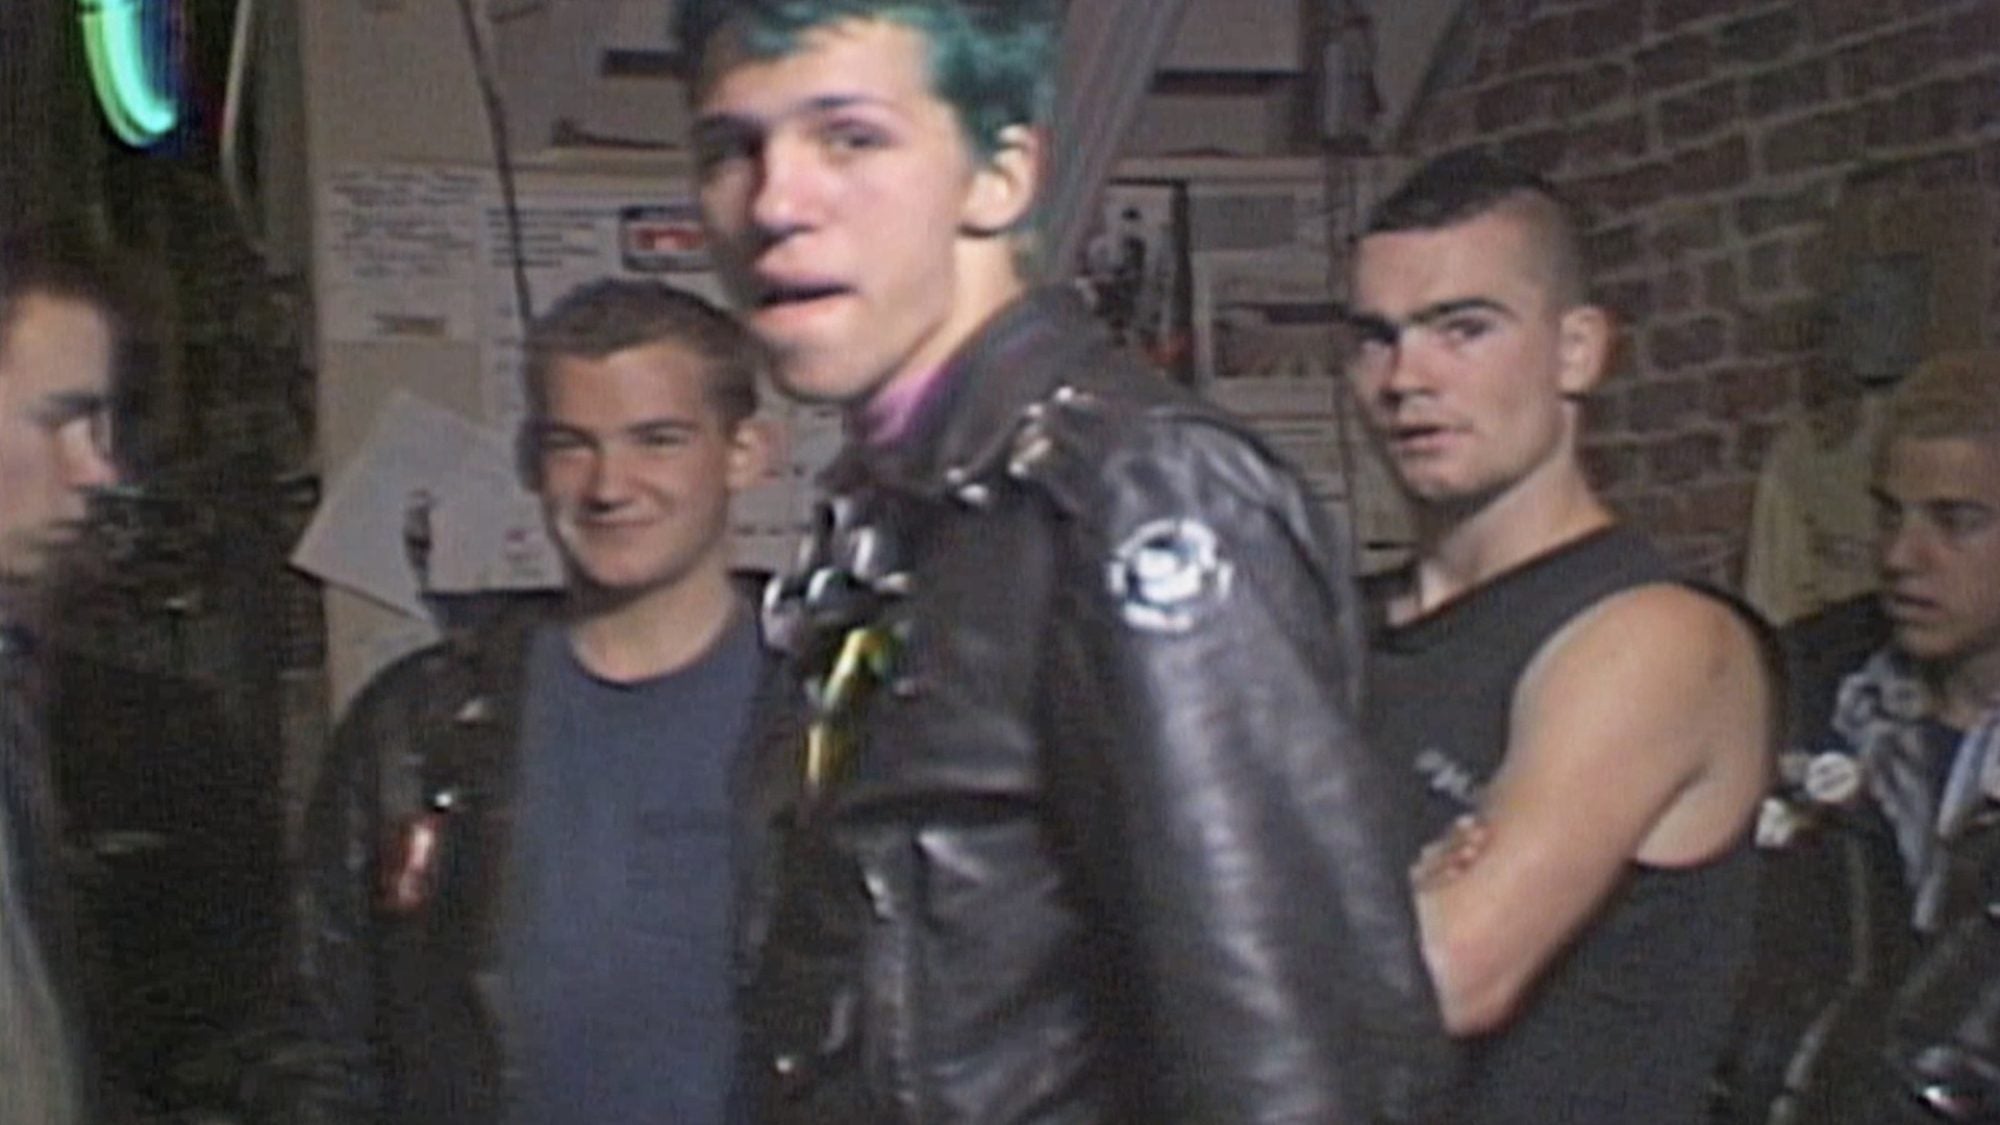 Group of people including punk vocalist Henry Rollins.